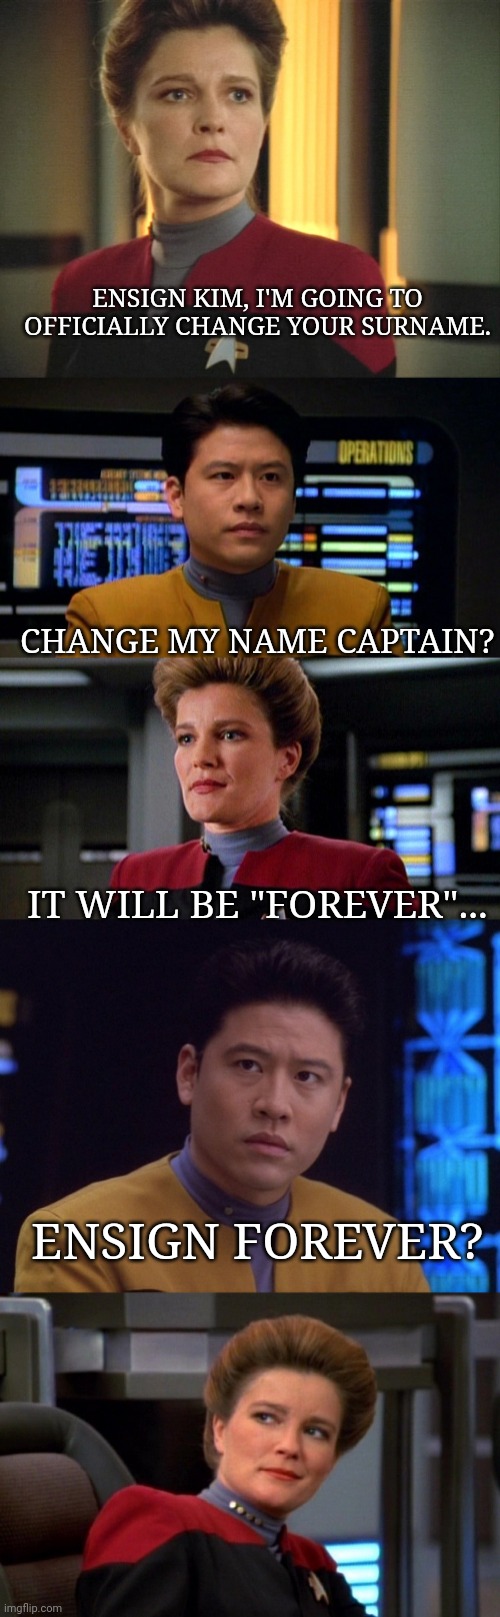 Ensign Forever Kim | ENSIGN KIM, I'M GOING TO OFFICIALLY CHANGE YOUR SURNAME. CHANGE MY NAME CAPTAIN? IT WILL BE "FOREVER"... ENSIGN FOREVER? | image tagged in star trek voyager,janeway,kim | made w/ Imgflip meme maker